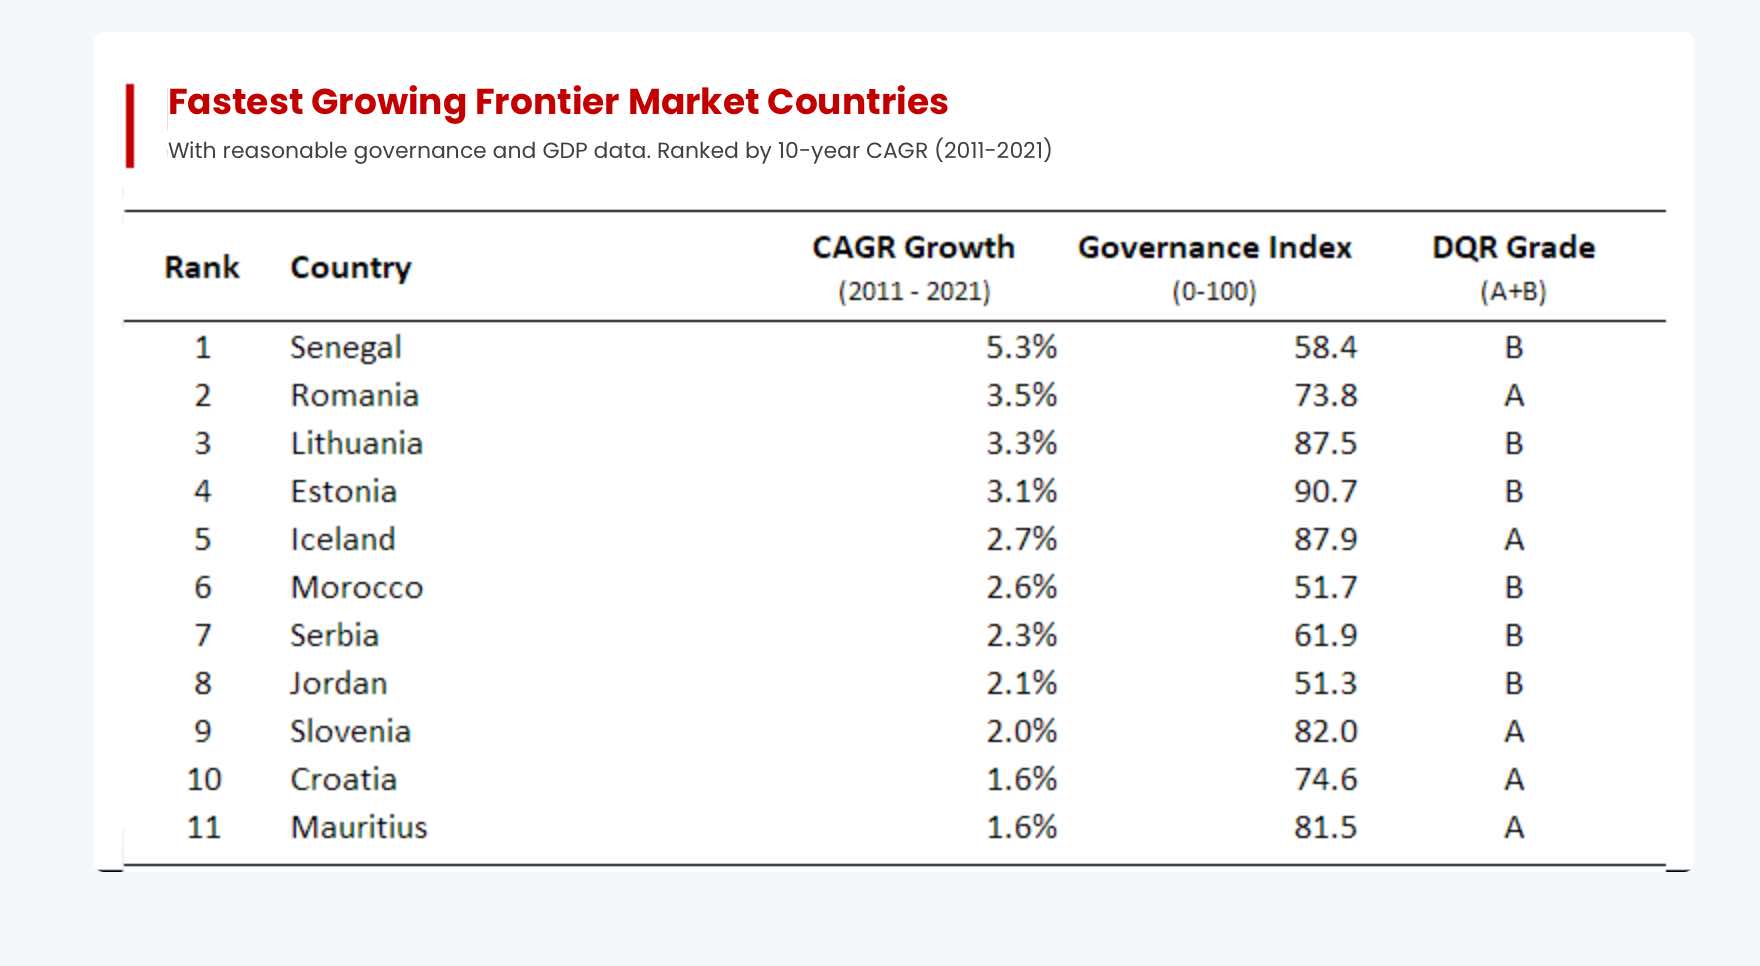 Fastest Growing Frontier Market Countries with Reasonable Governance and GDP Data